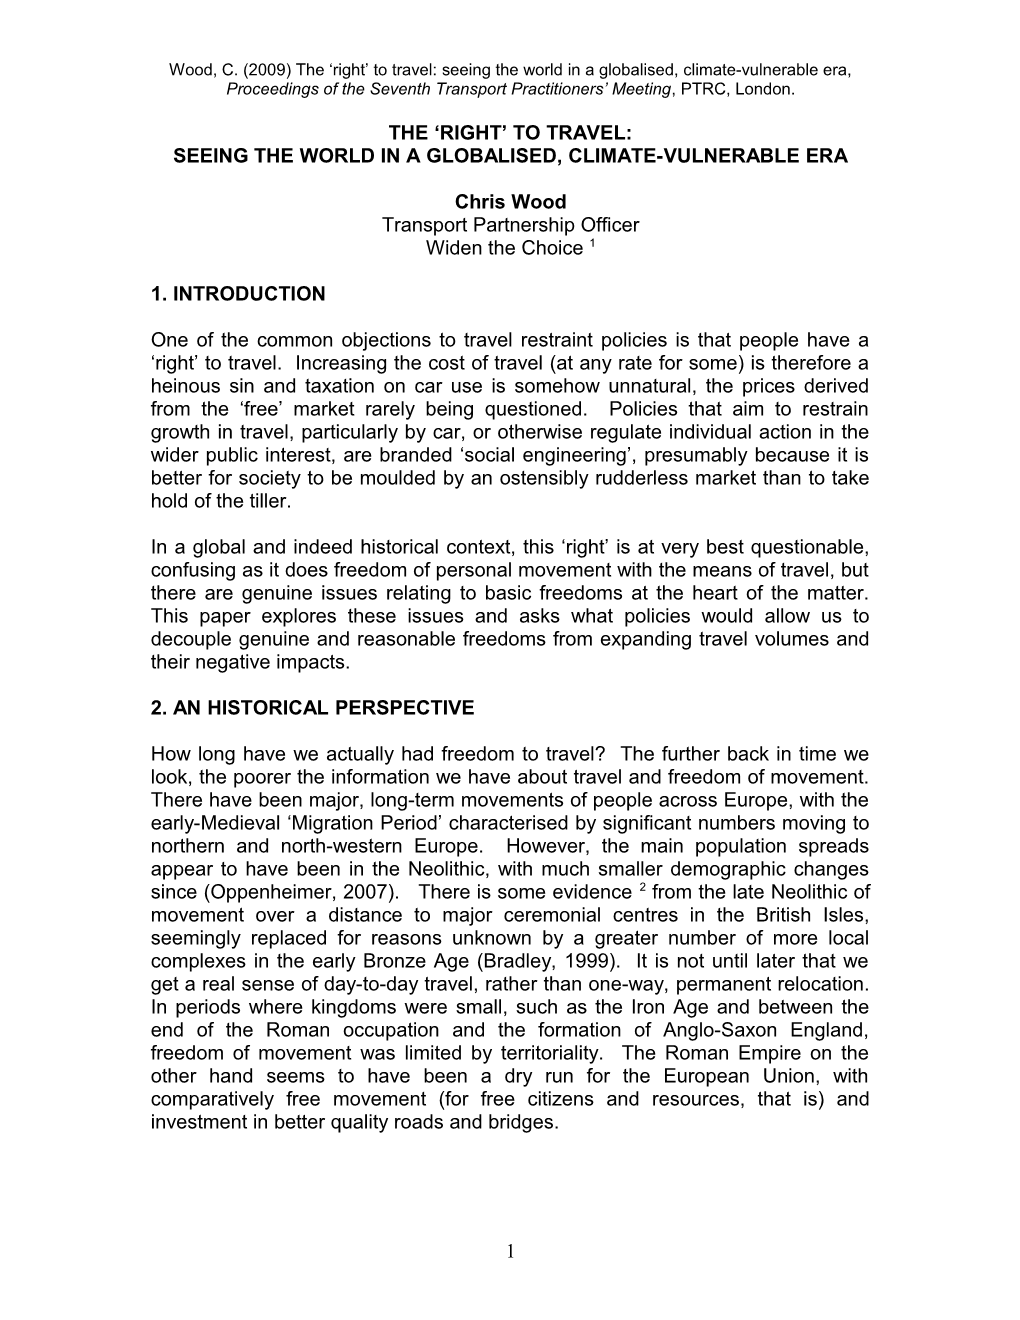 Proposed Abstract for the Seventh Transport Practitioners Meeting, 2009